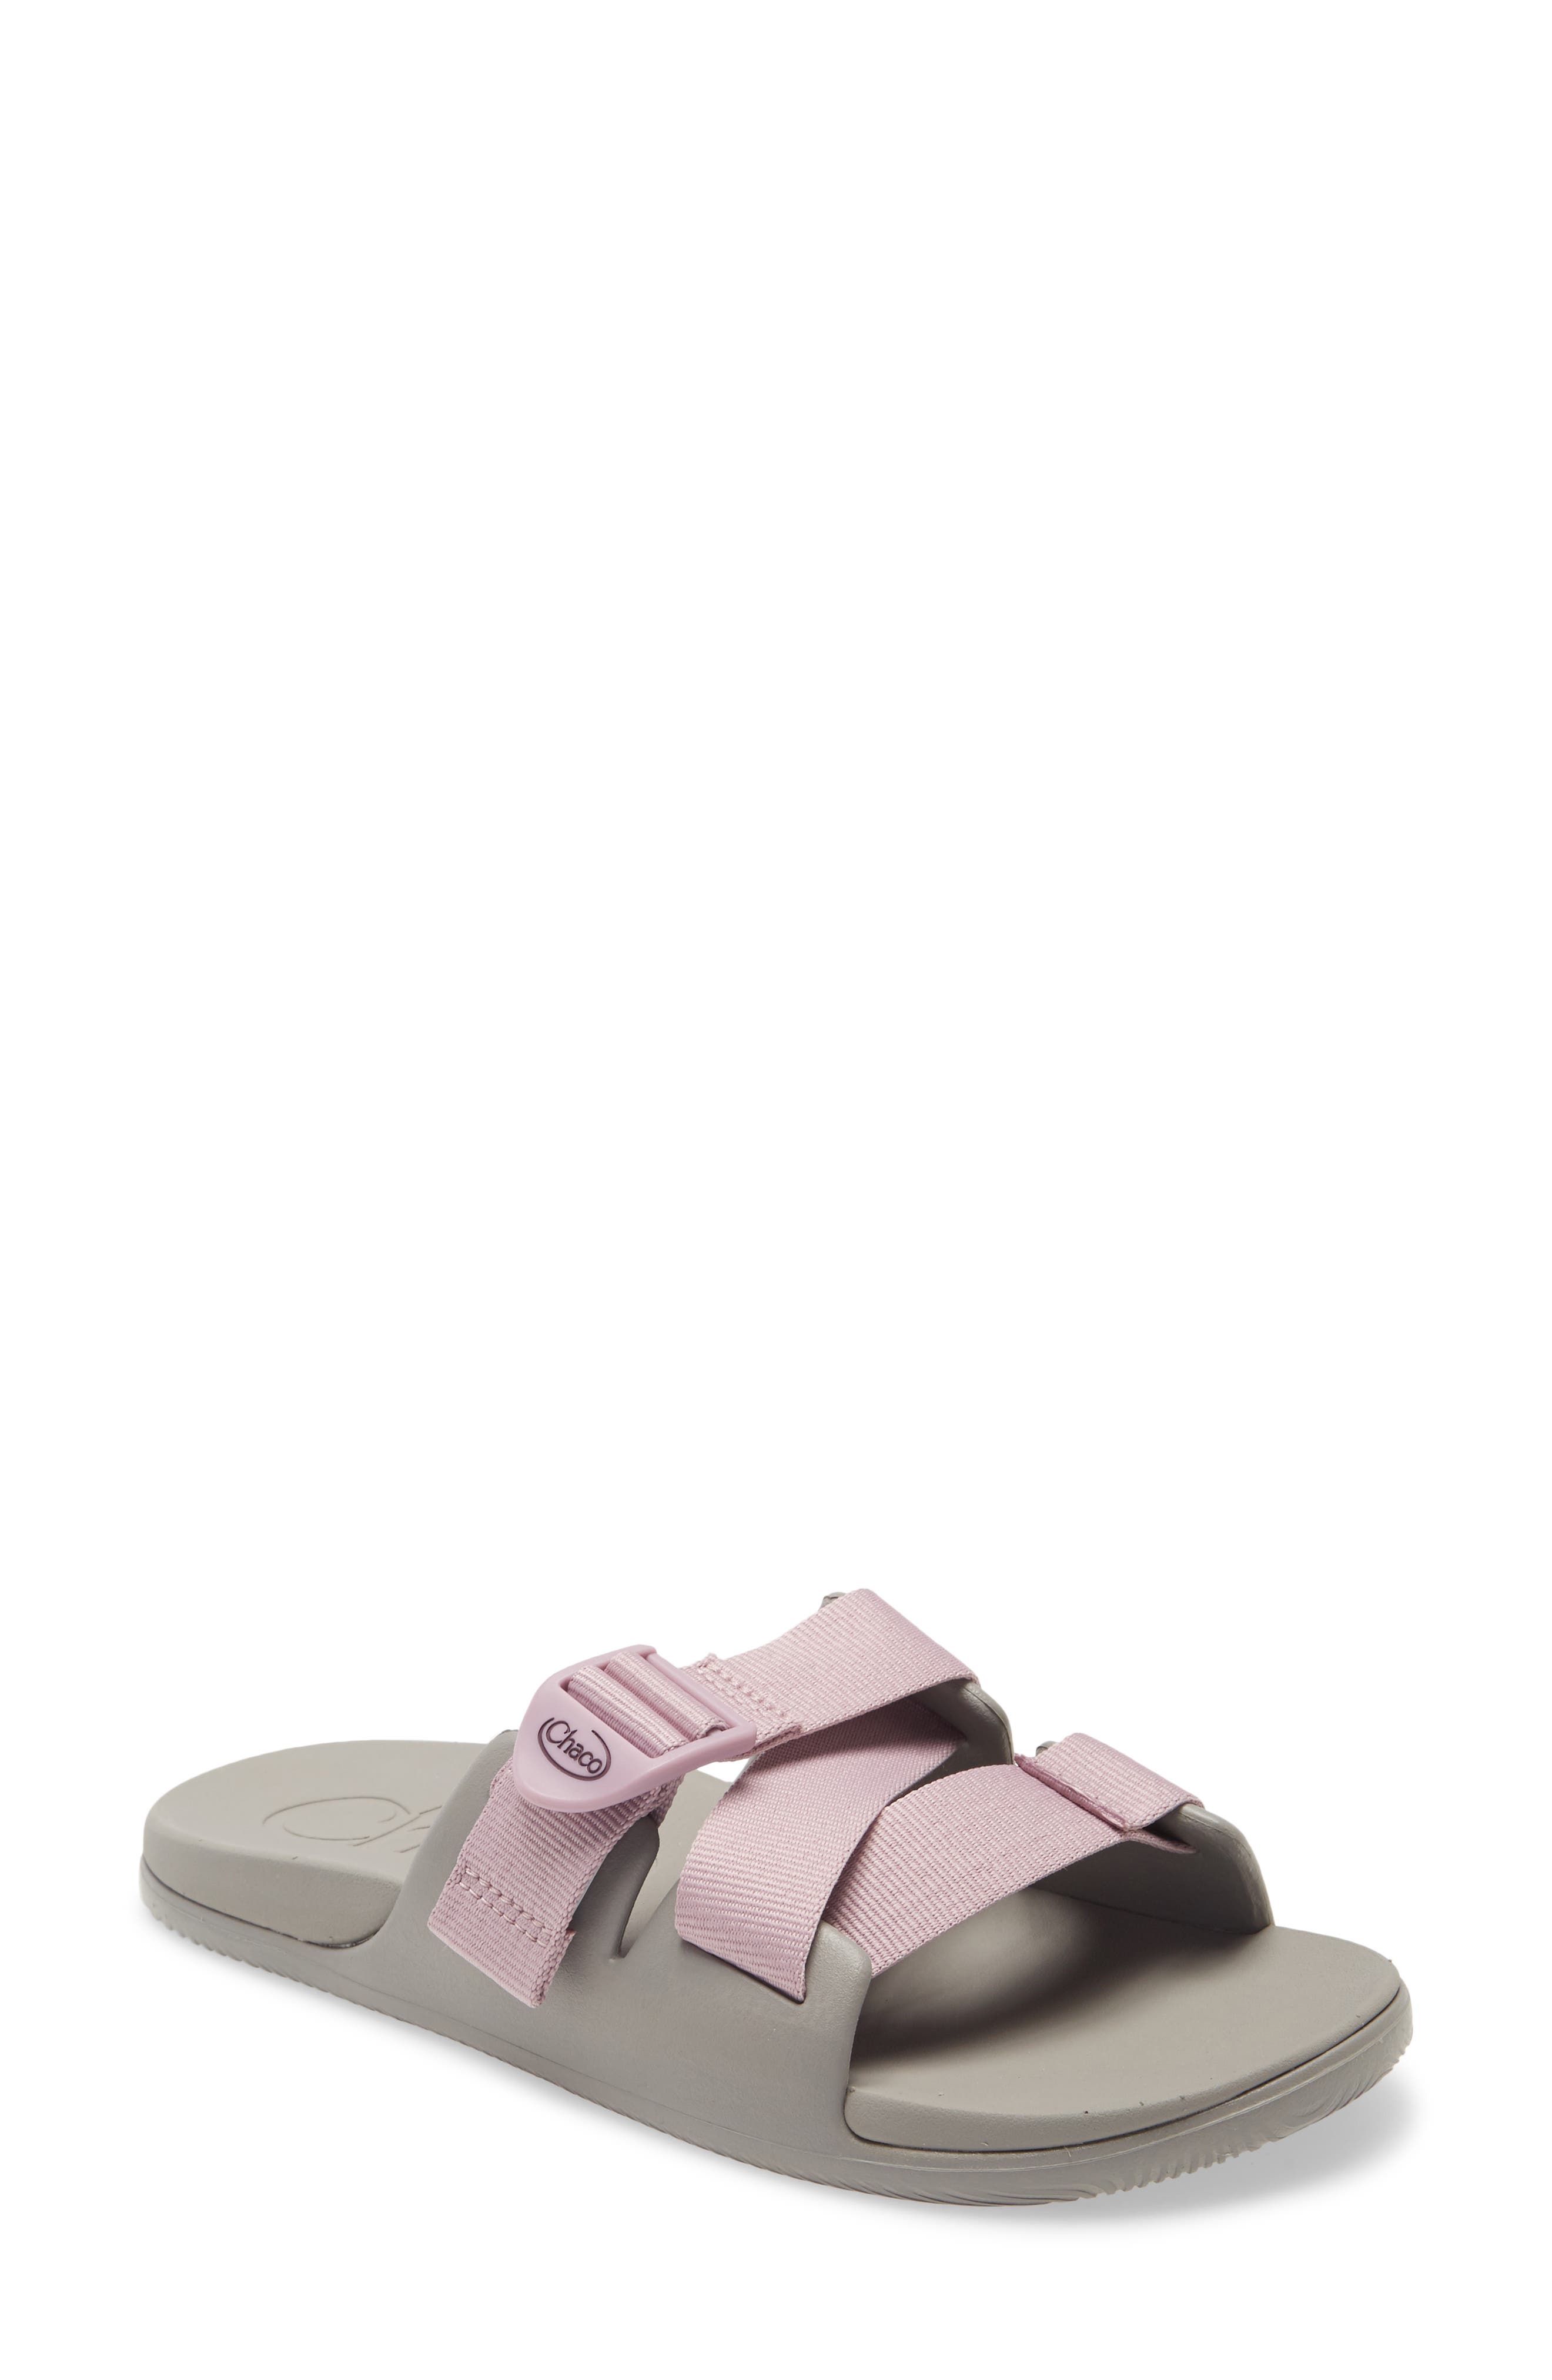 urban outfitters chacos